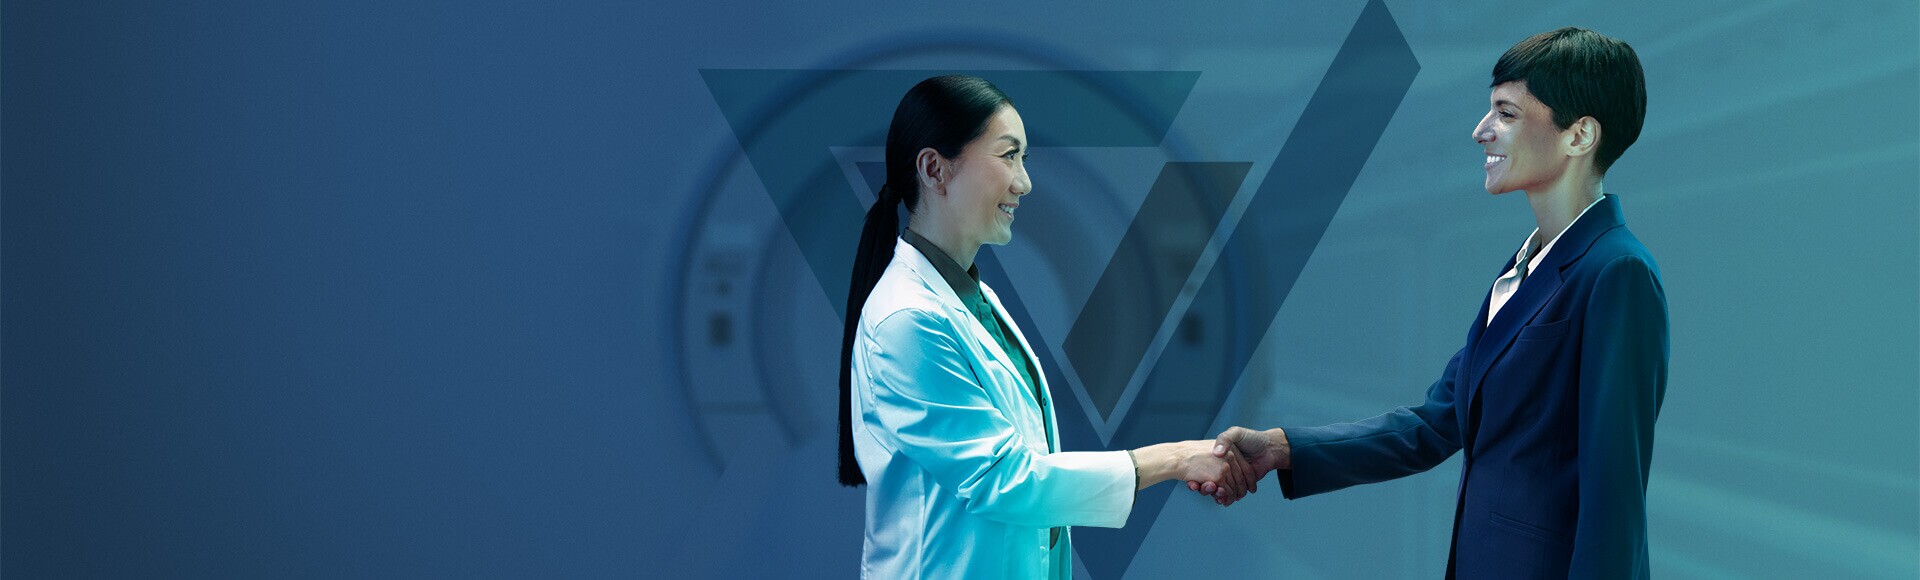 Portrait of a female dressing in doctor uniform shaking hands with sales representative